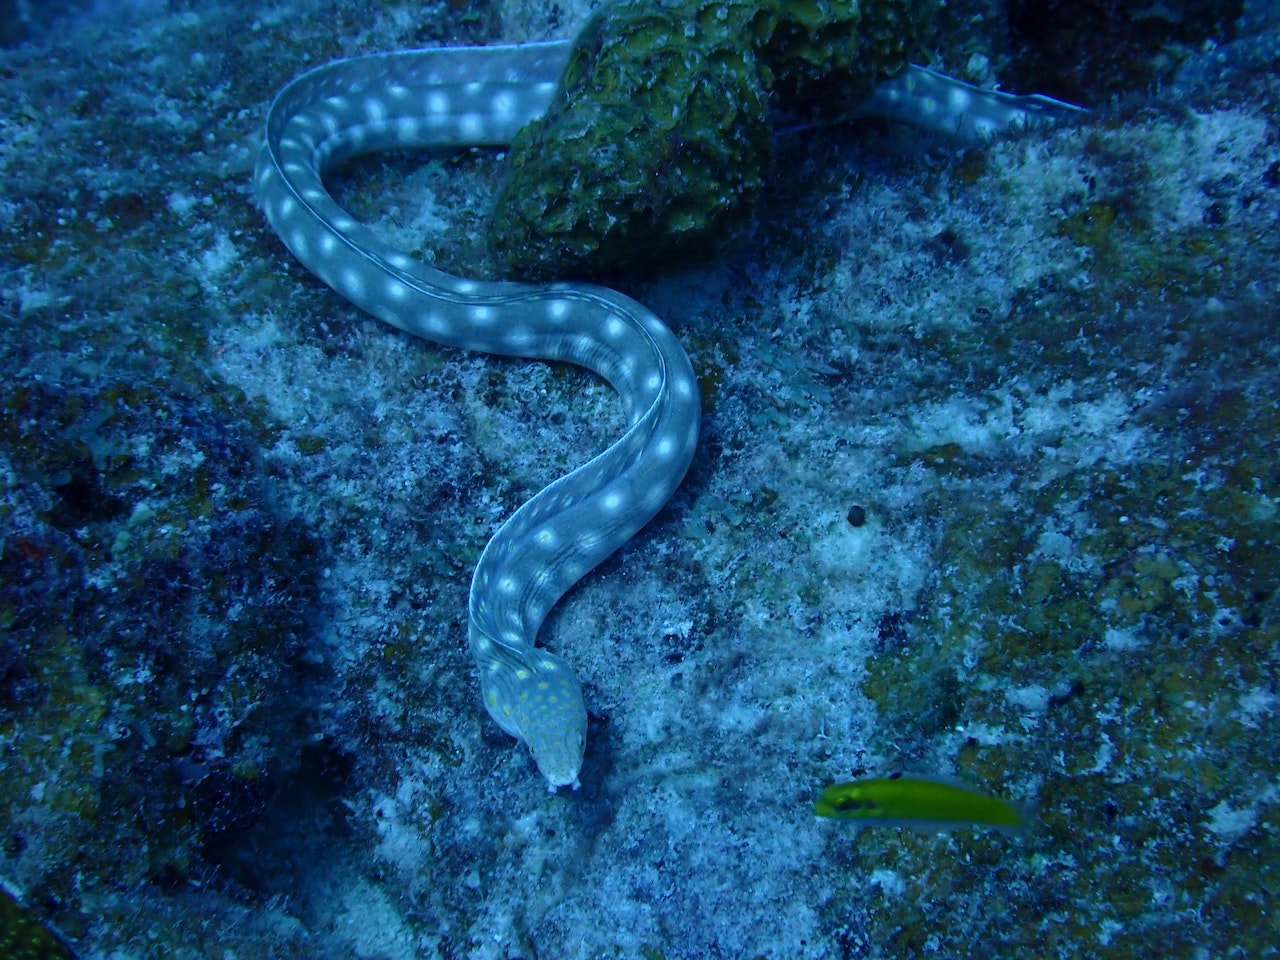 How Eels Use Their Sense of Smell to Navigate Their Environment?